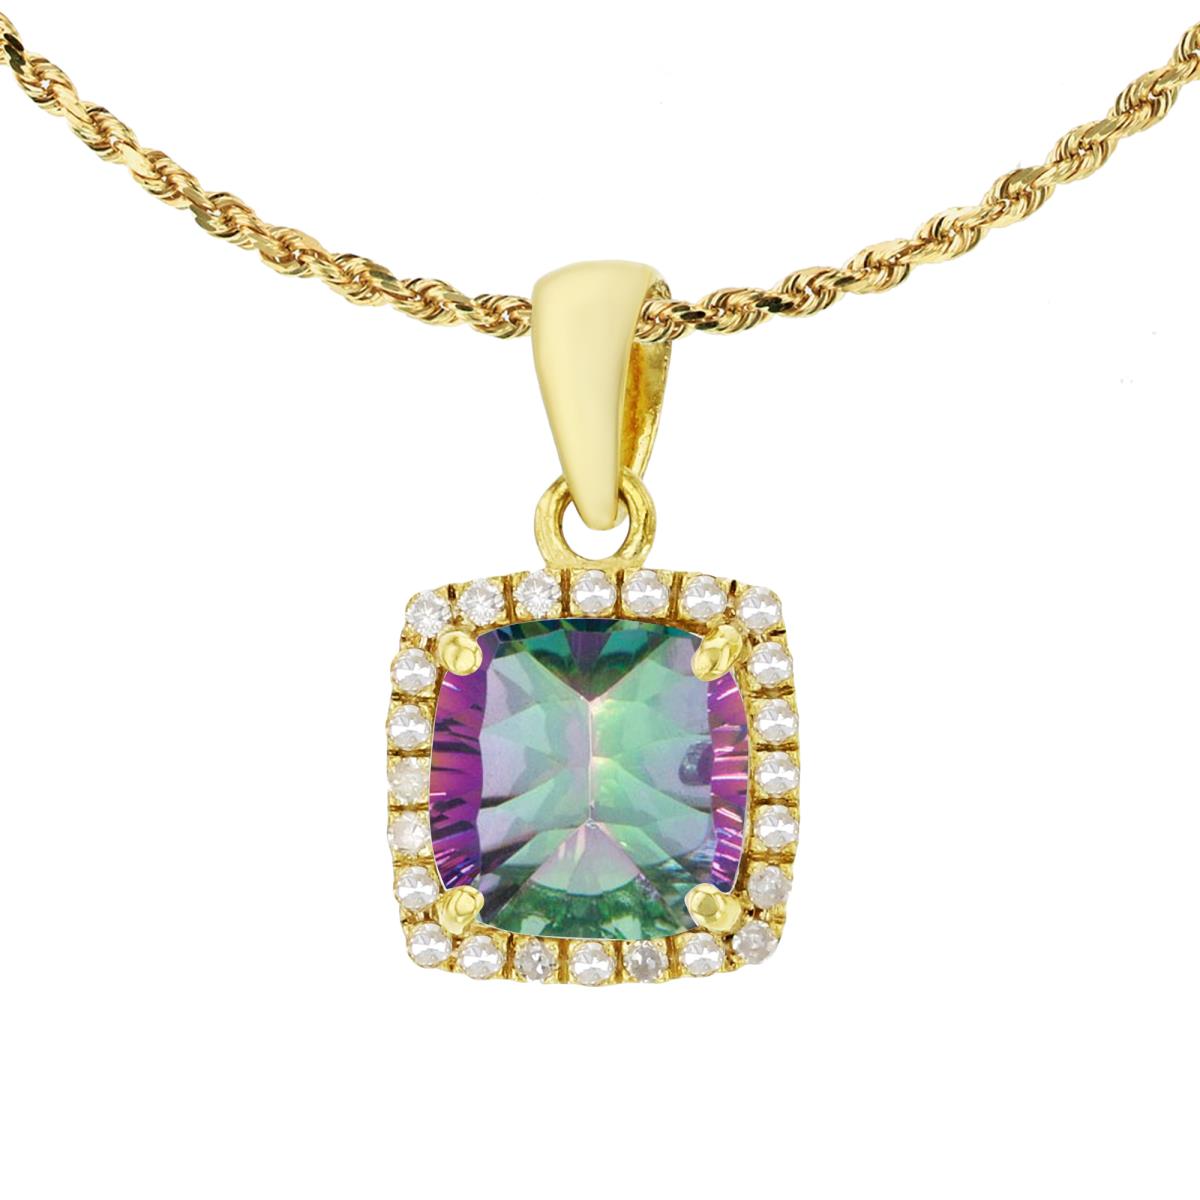 14K Yellow Gold 7mm Cushion Mystic Green Topaz & 0.12 CTTW Diamond Halo 18" Rope Chain Necklace